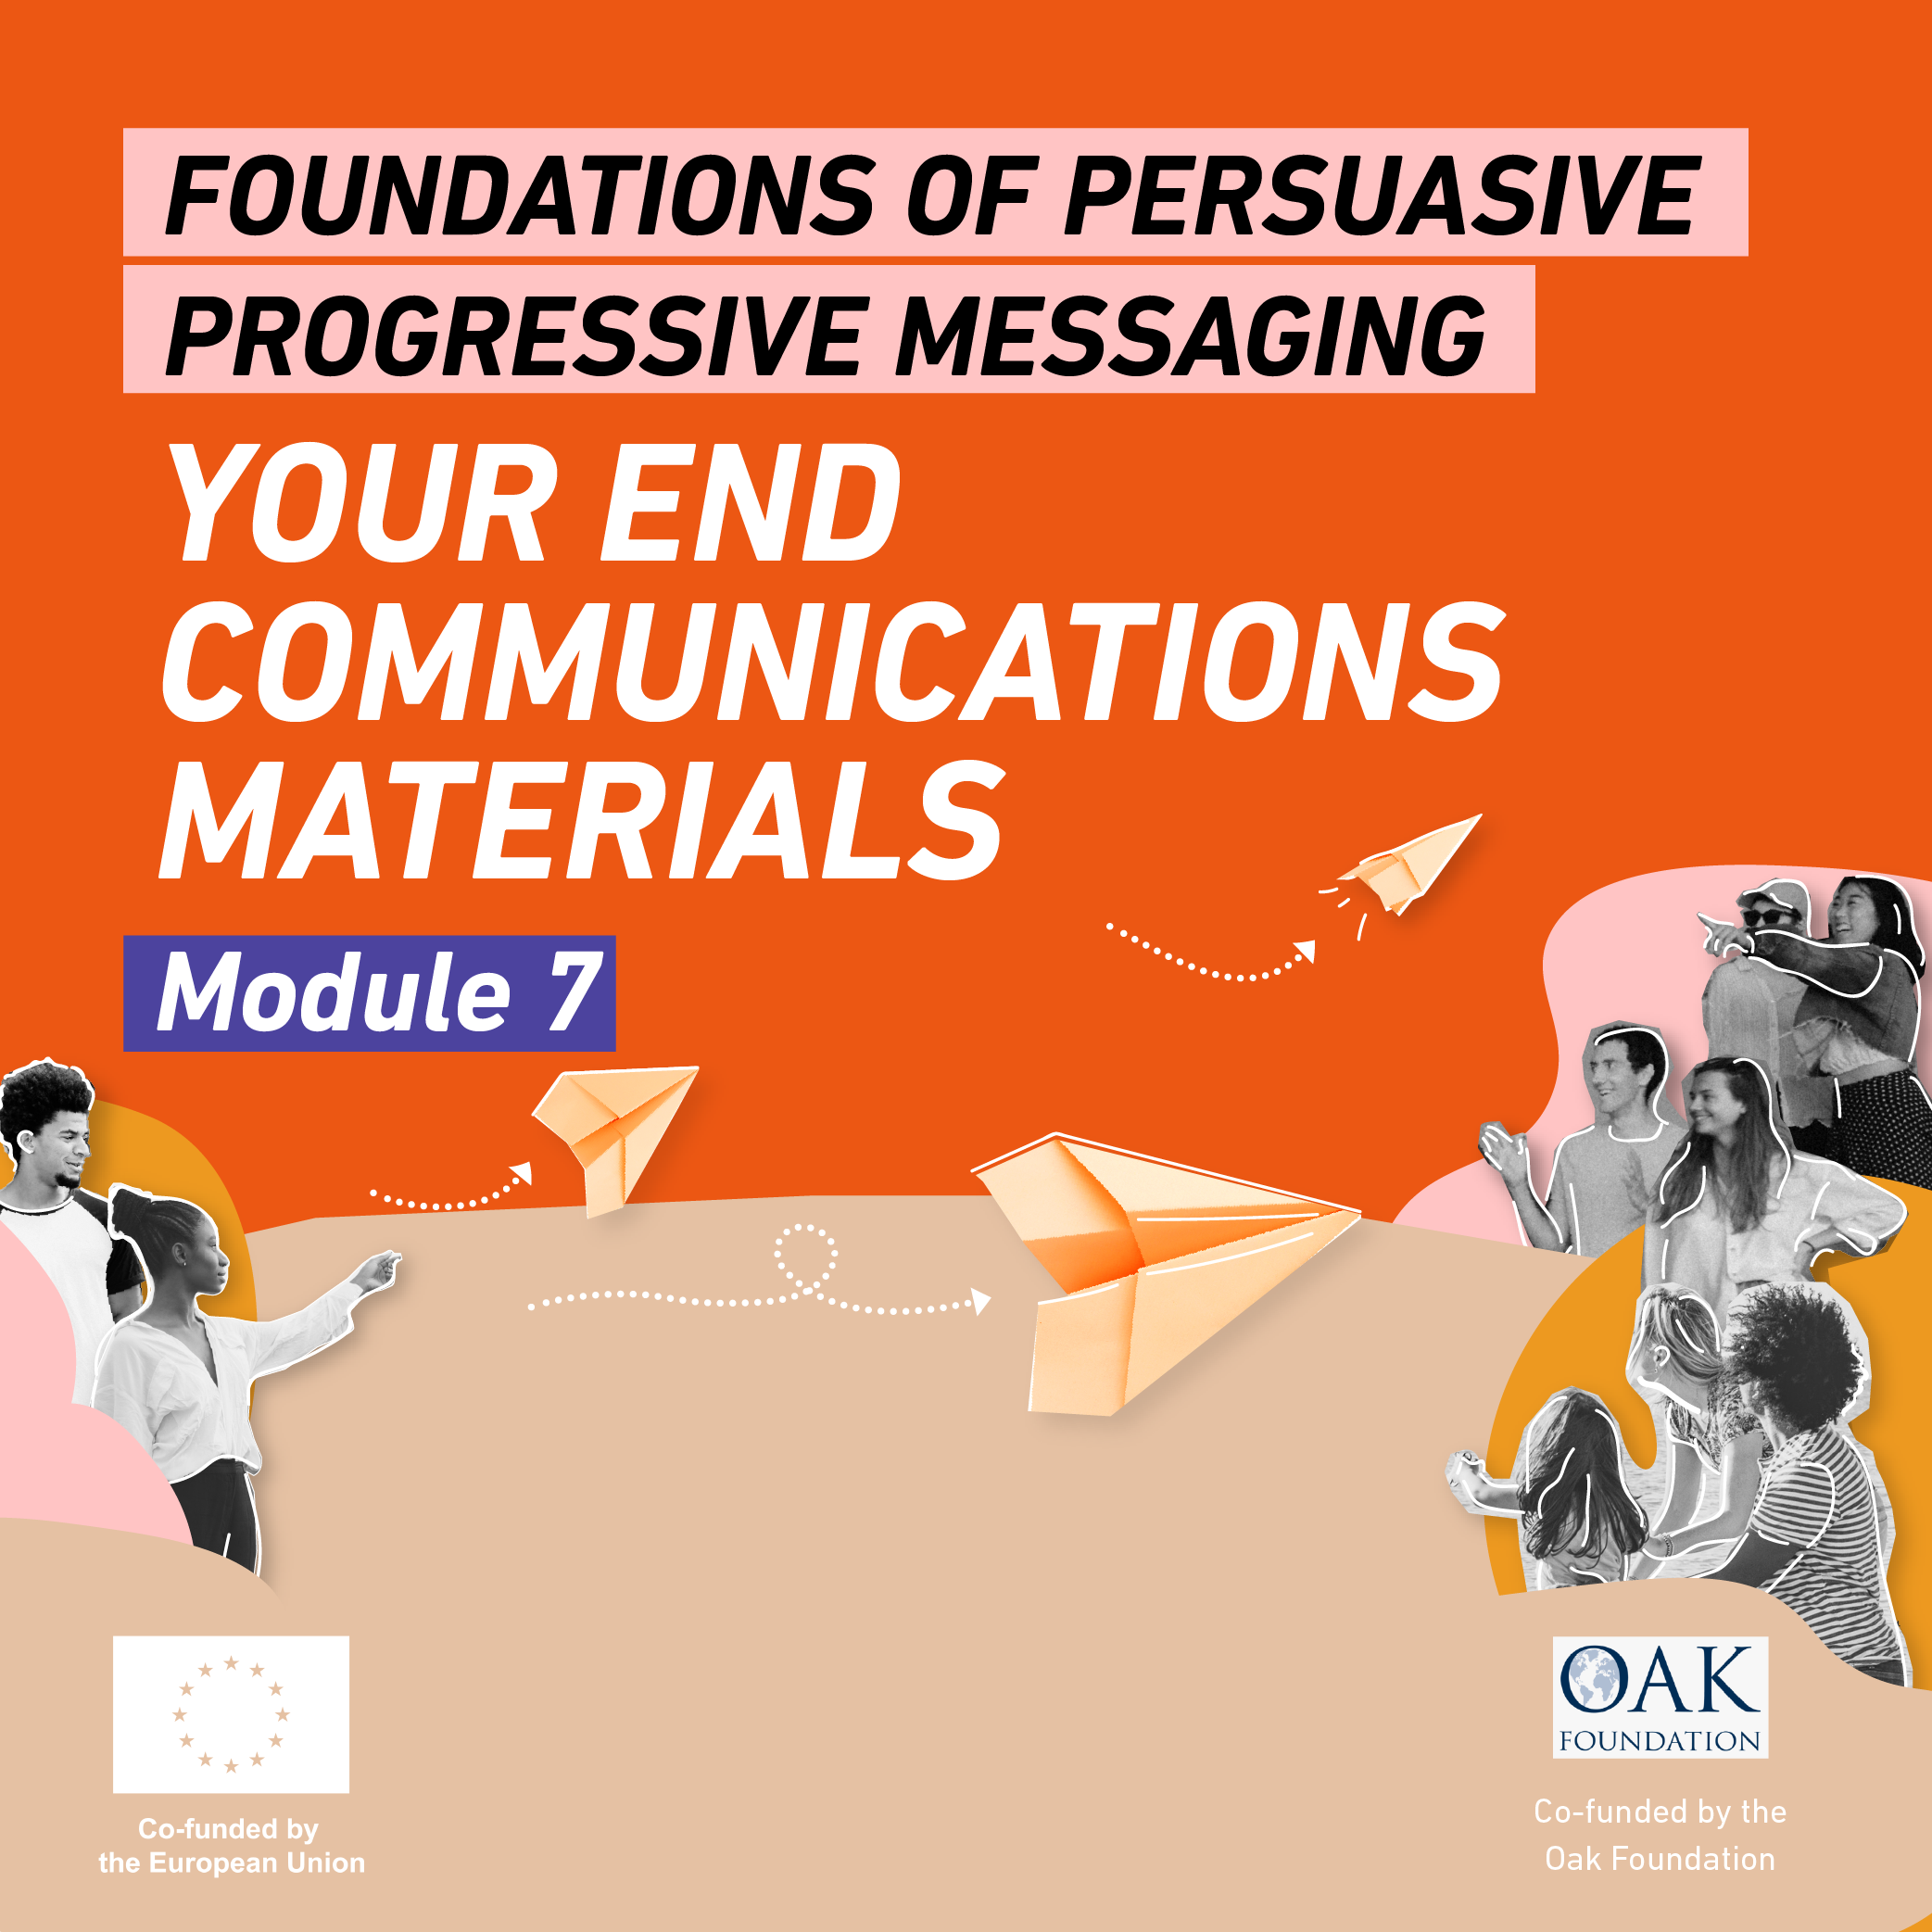 Foundations of Persuasive Progressive Messaging - Module 7 of 7: Your end communications materials LIB008